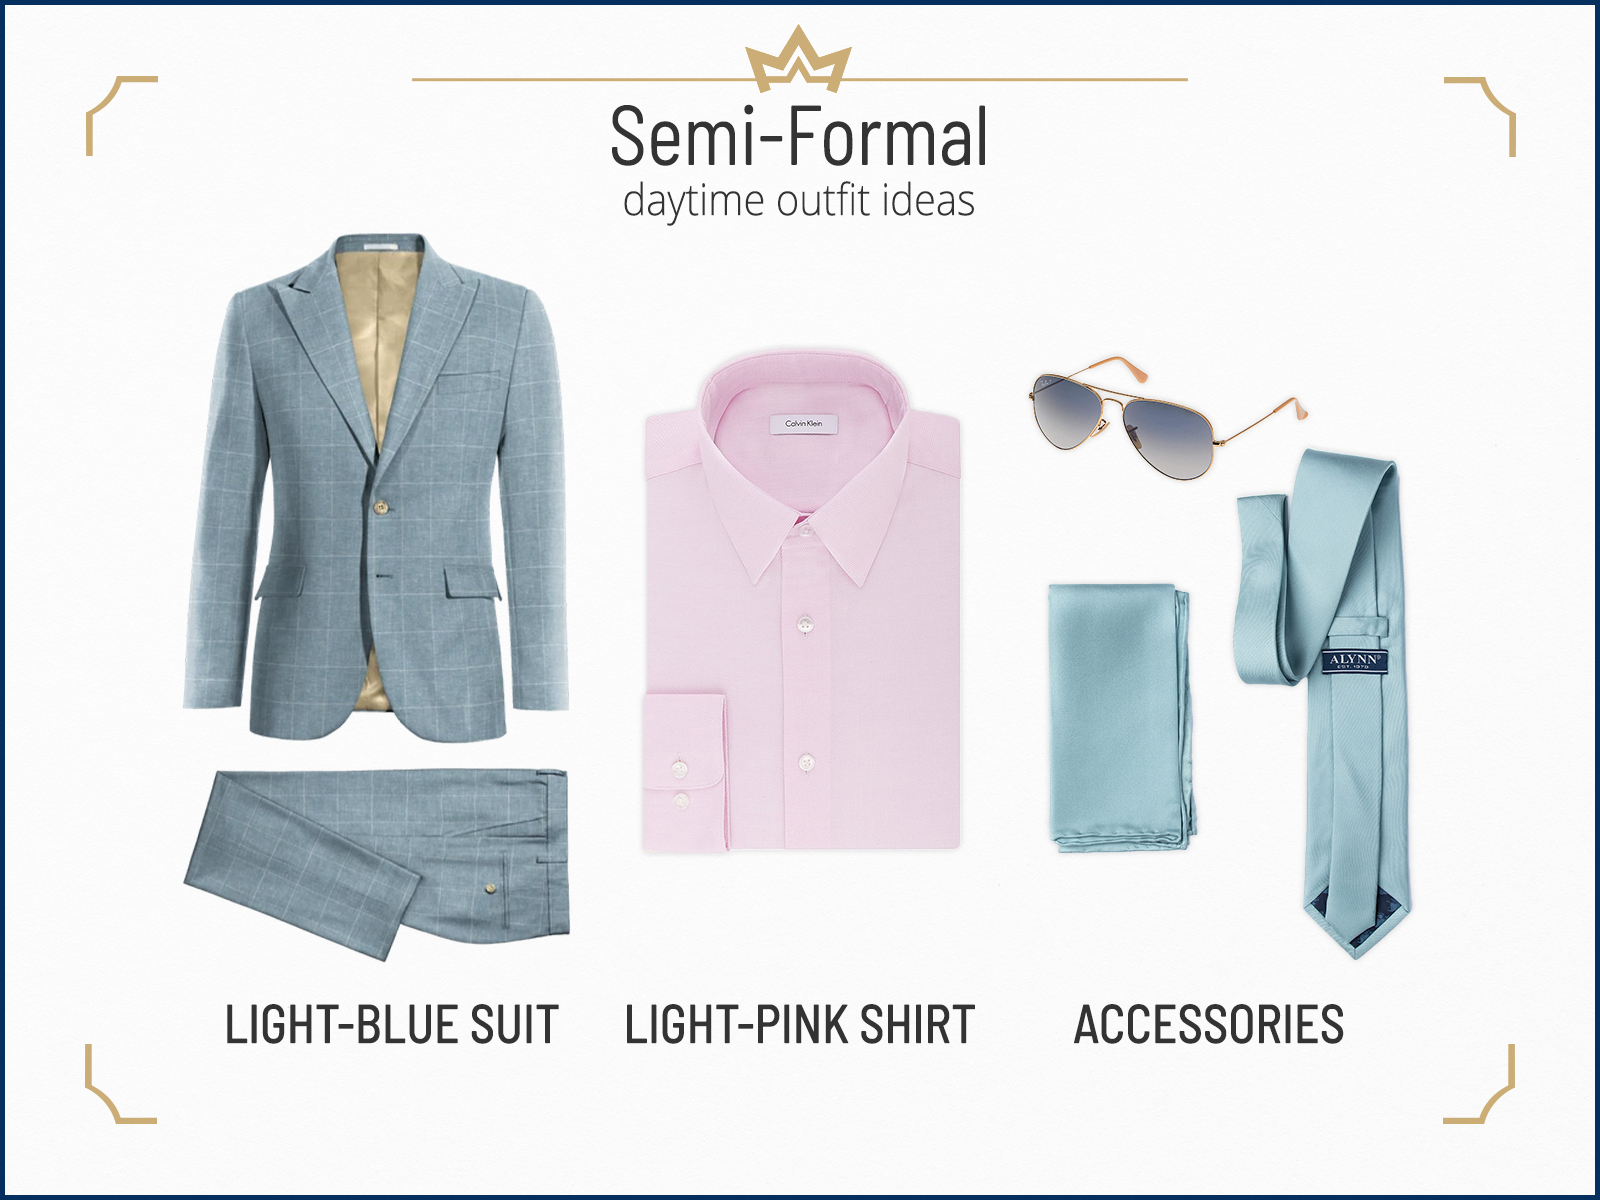 Semi-formal daytime outfit idea with a light blue suit